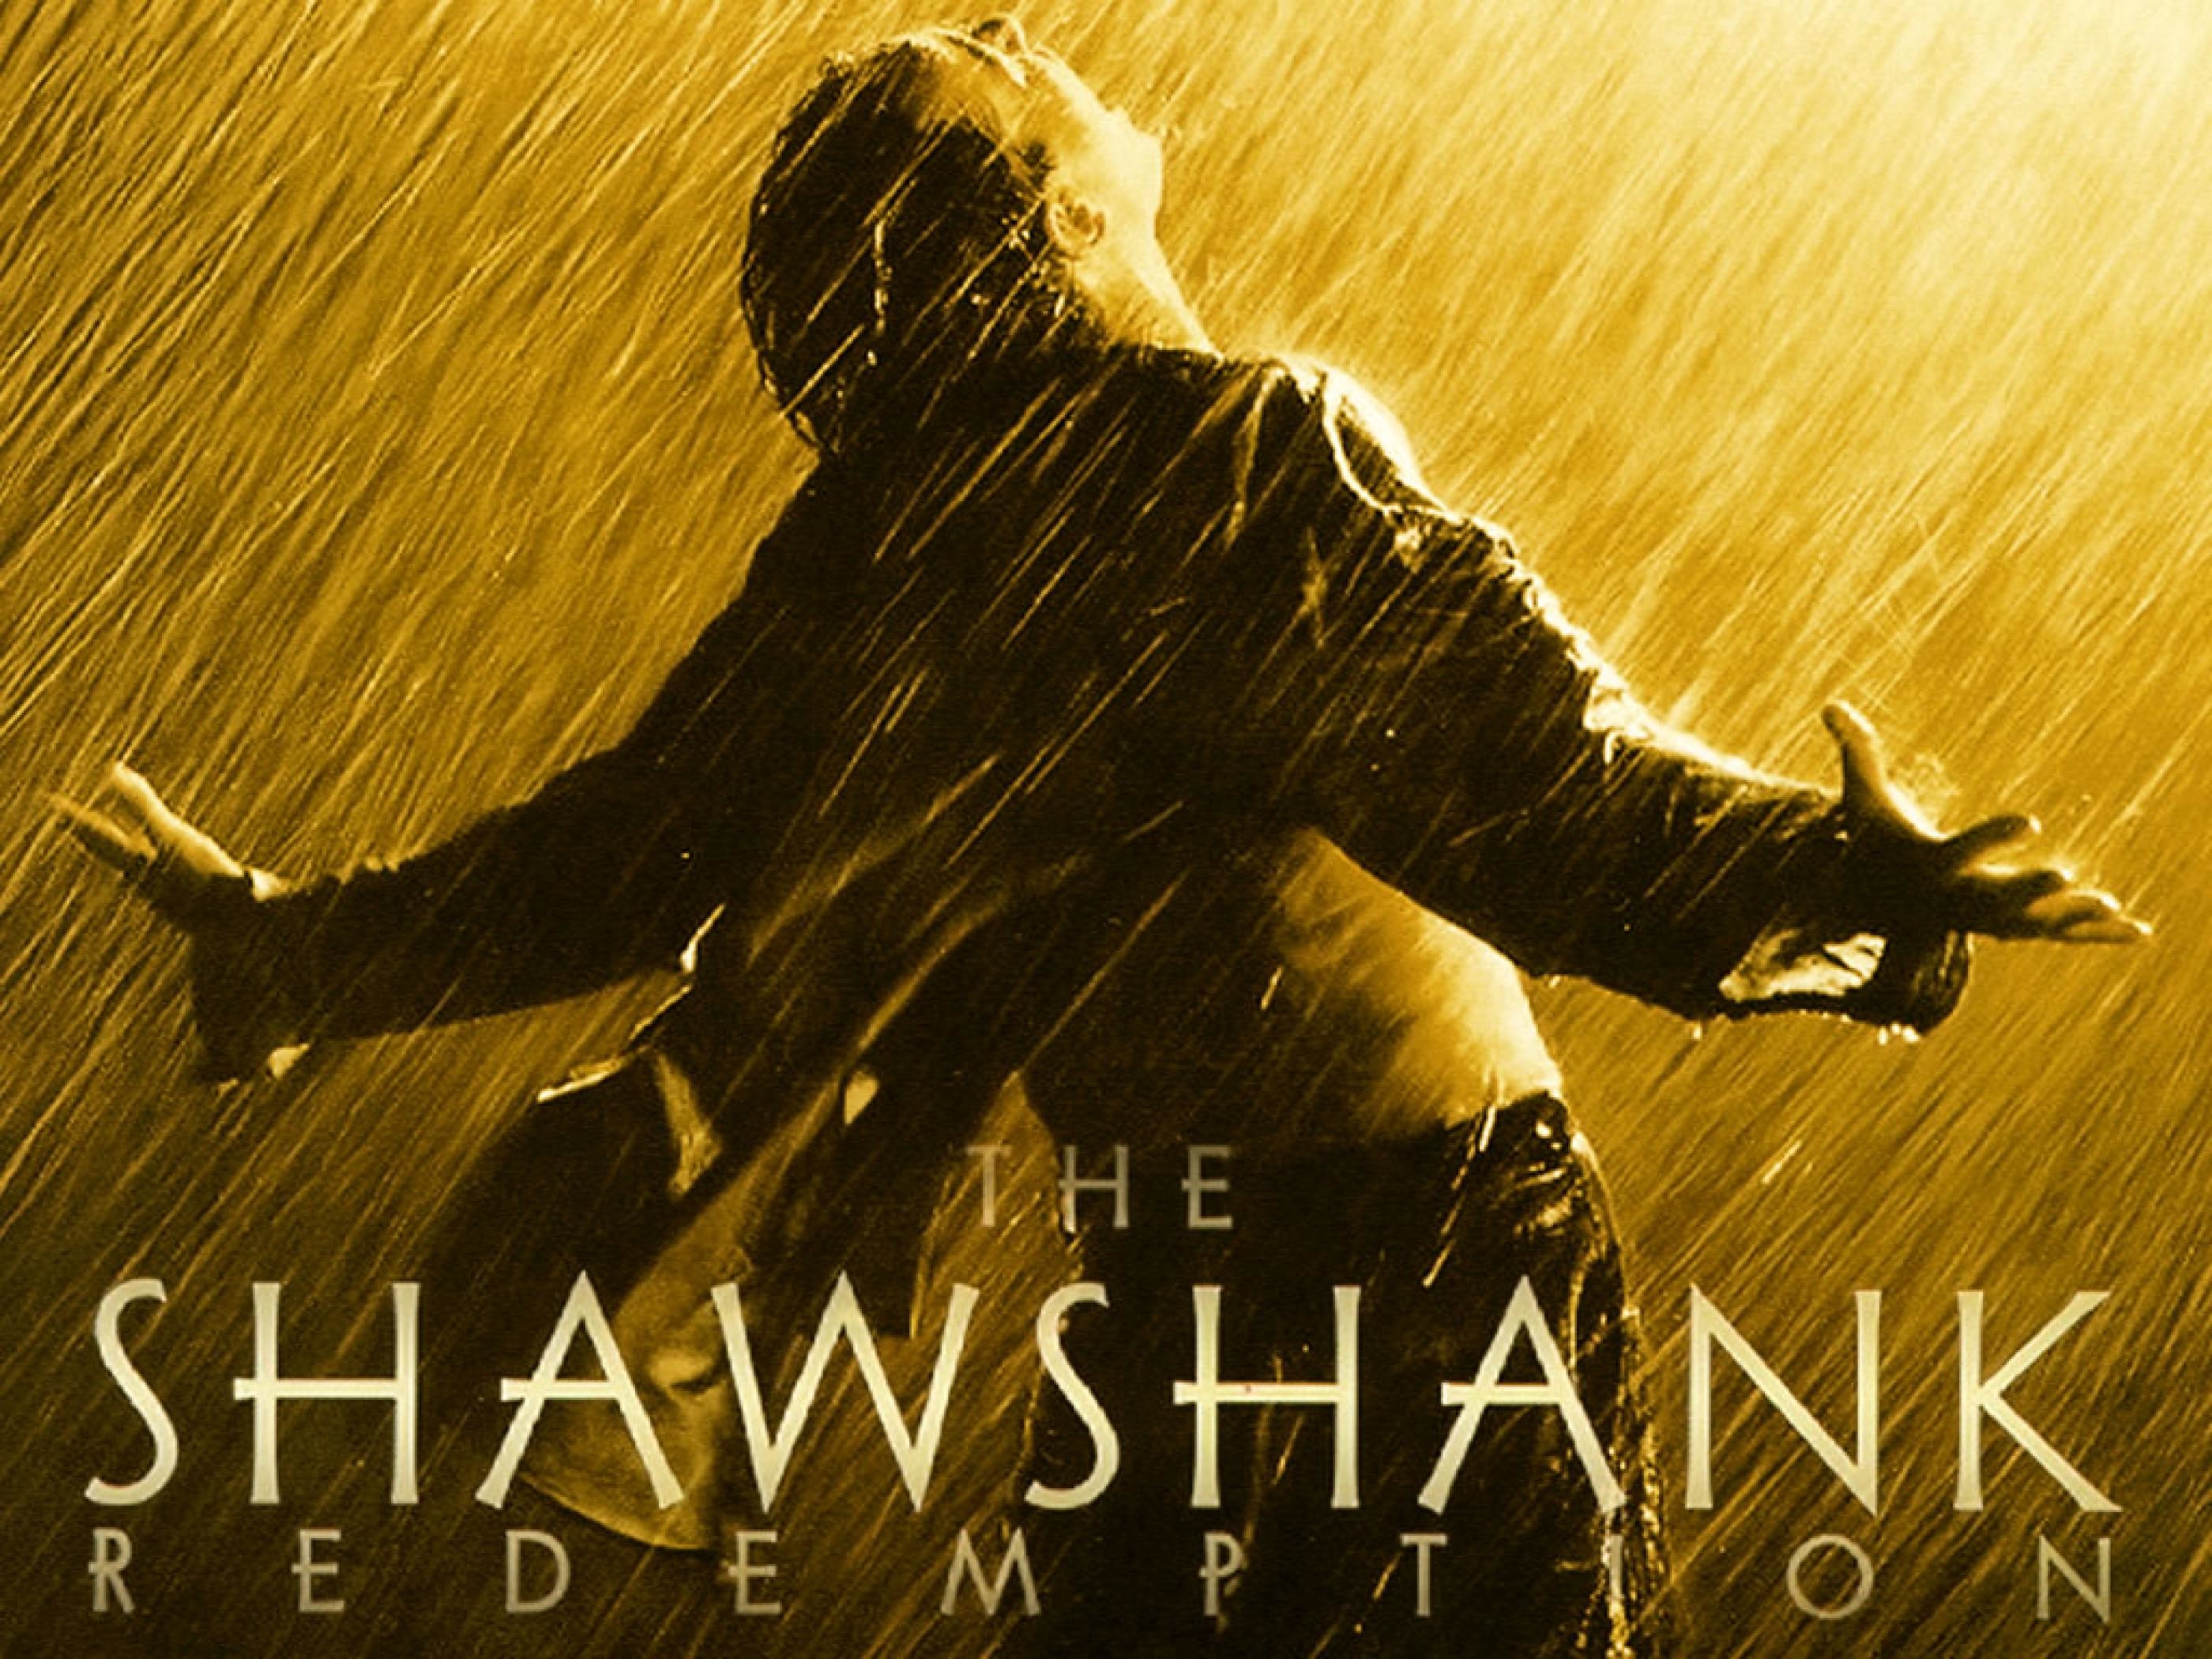 2800x2100 Now Playing at Imgur's Movie Lounge - The Shawshank Redemption